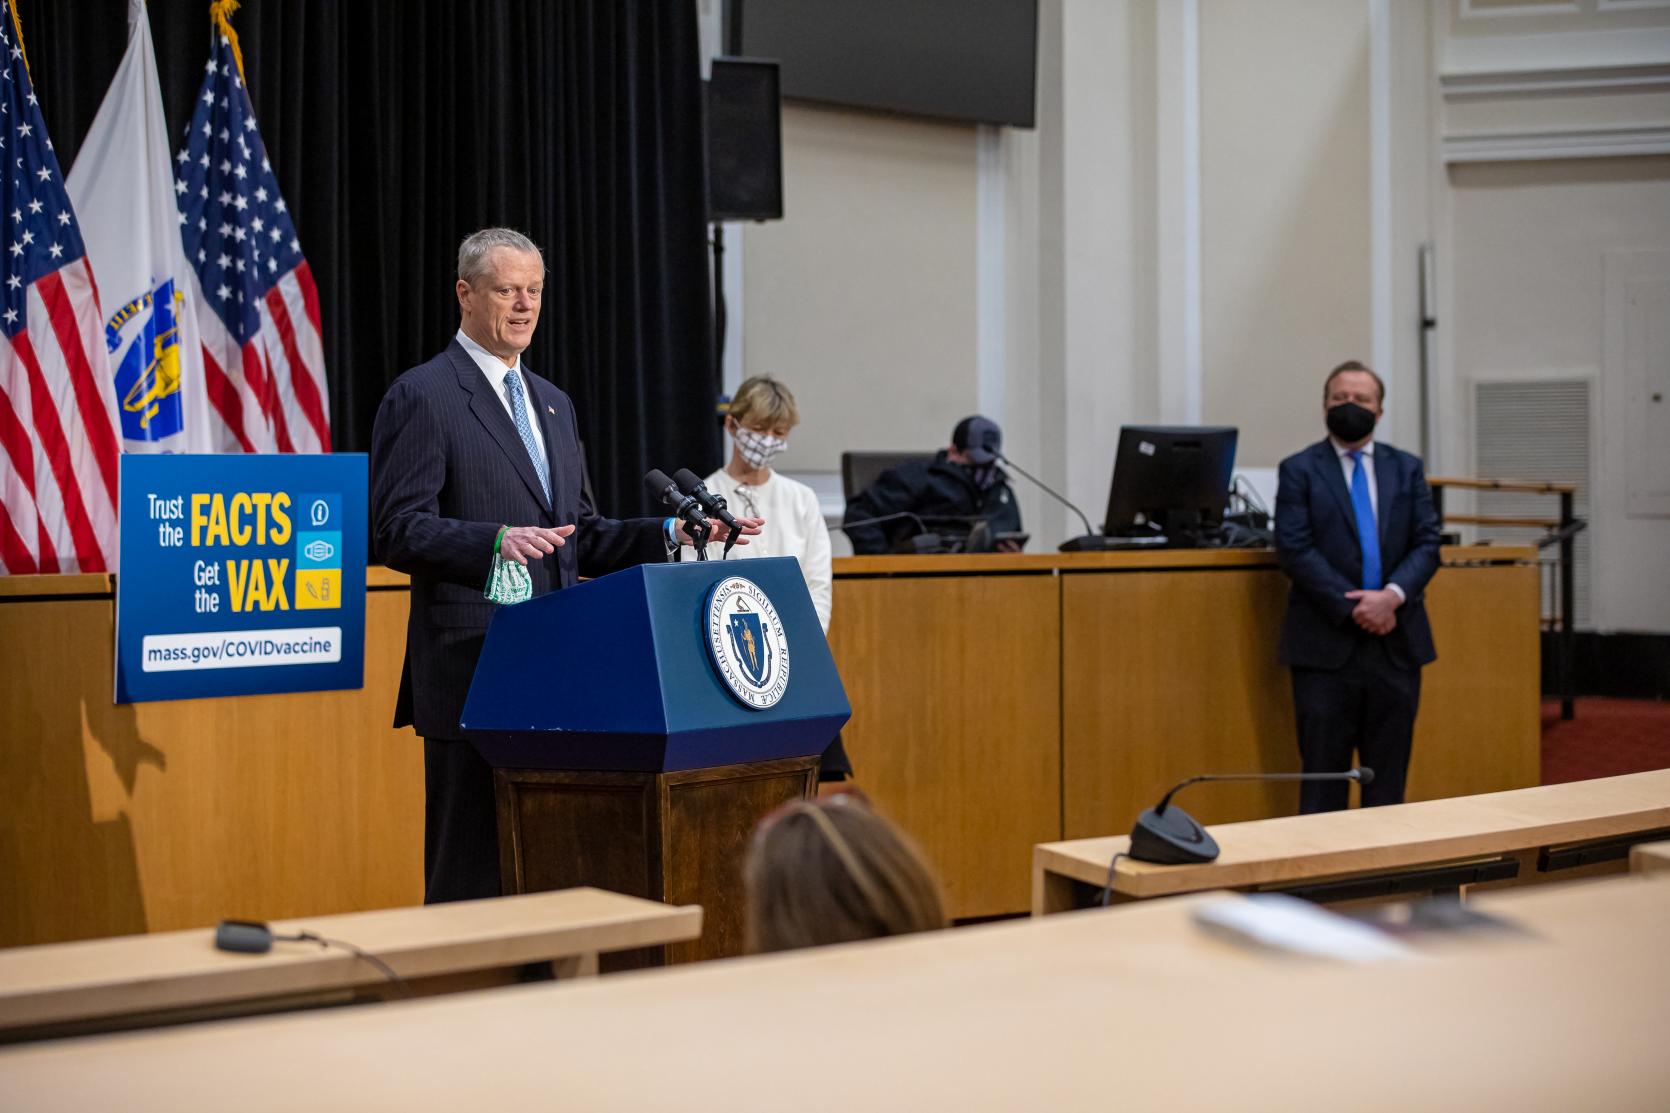 Baker-Polito Administration on Track to Hit Goal of 4.1 Million People Vaccinated, Announces Next Phase of Vaccination Efforts